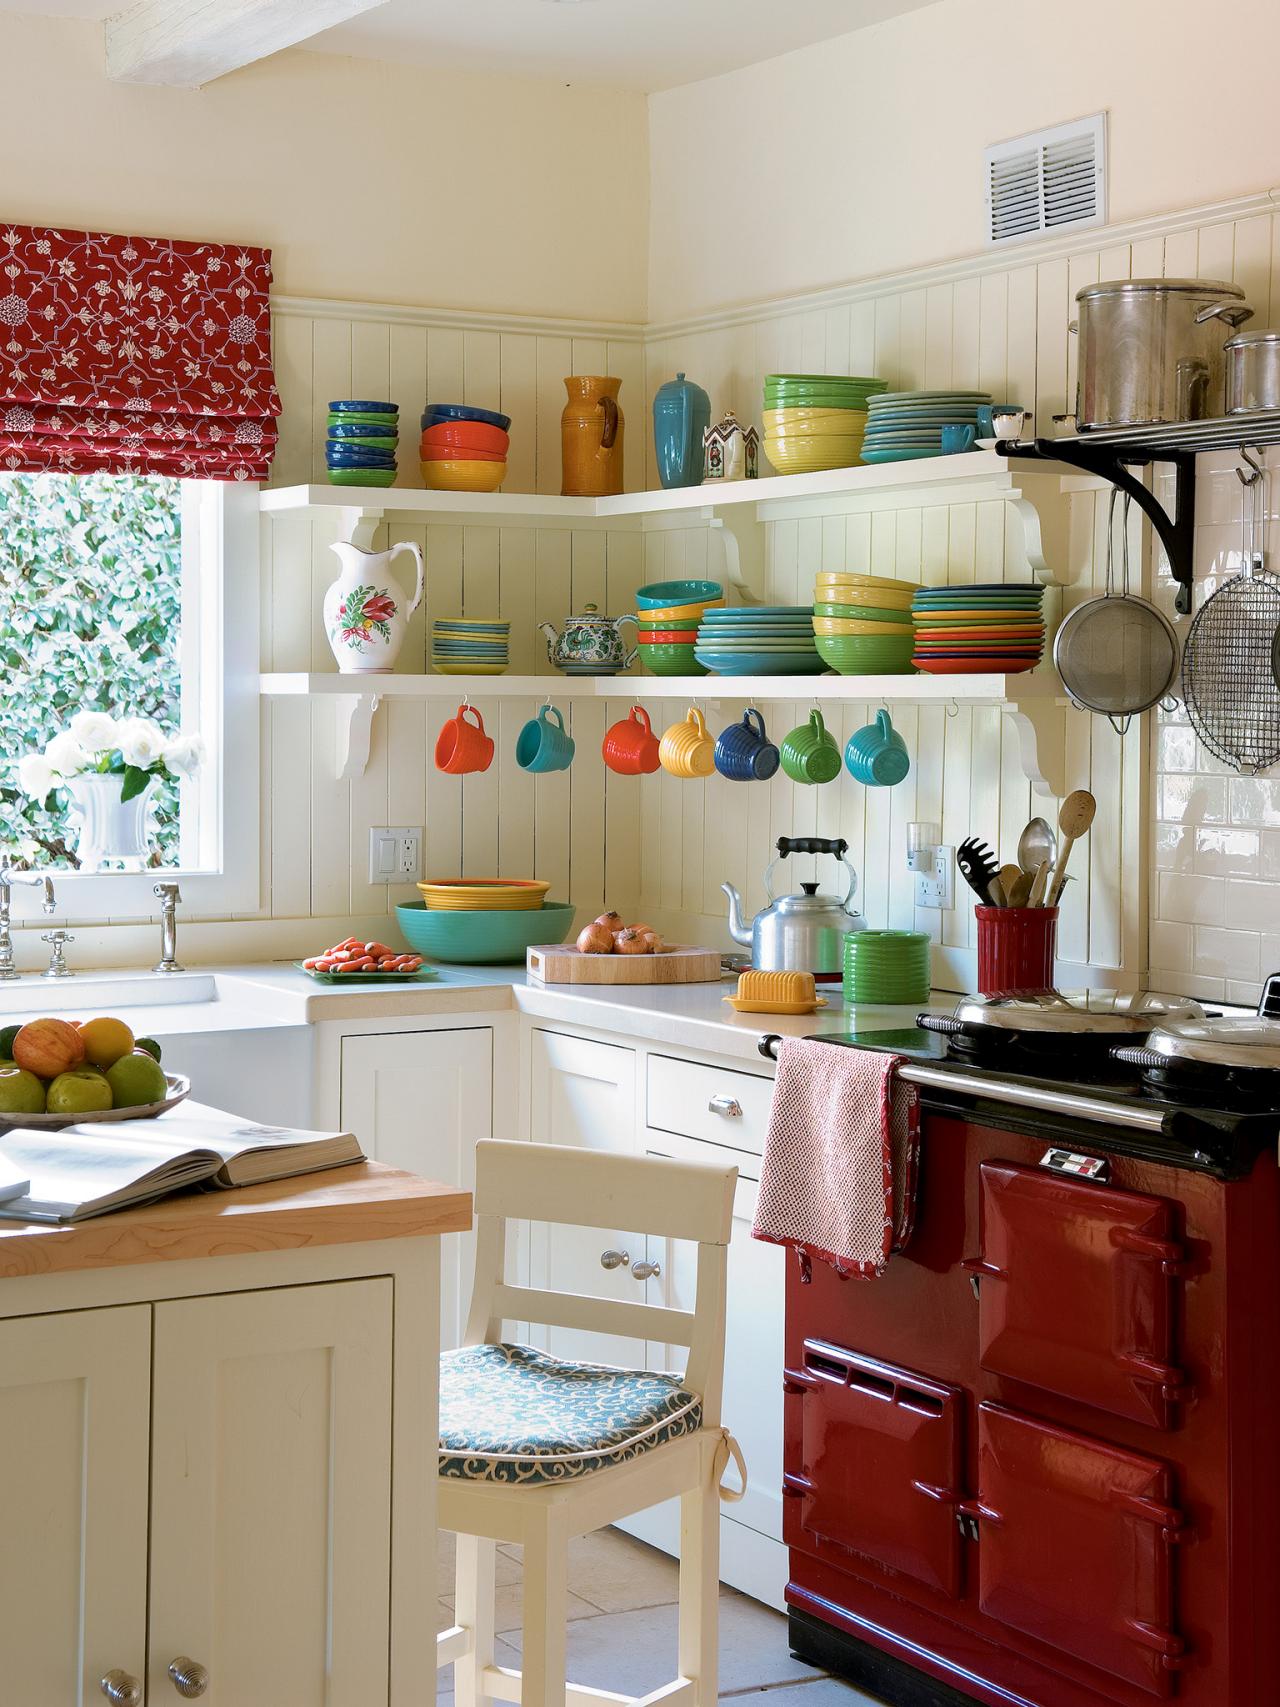 25 Best Small Kitchen Ideas and Designs that are Stylish in 25